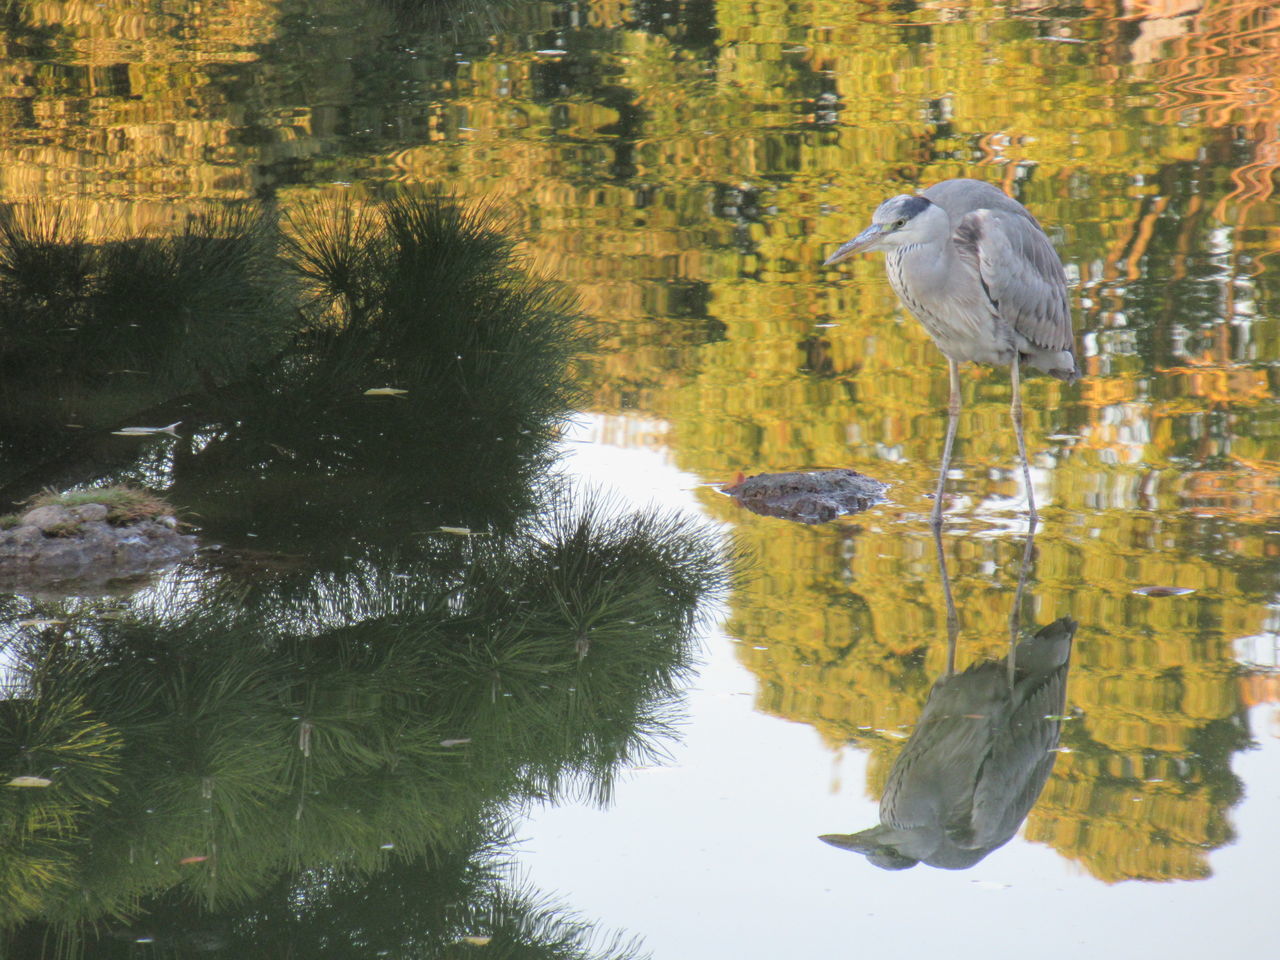 reflection, water, autumn, tree, lake, leaf, plant, nature, animal wildlife, animal themes, wildlife, animal, no people, beauty in nature, day, bird, one animal, outdoors, waterfront, tranquility, wilderness, growth, scenics - nature, forest, heron